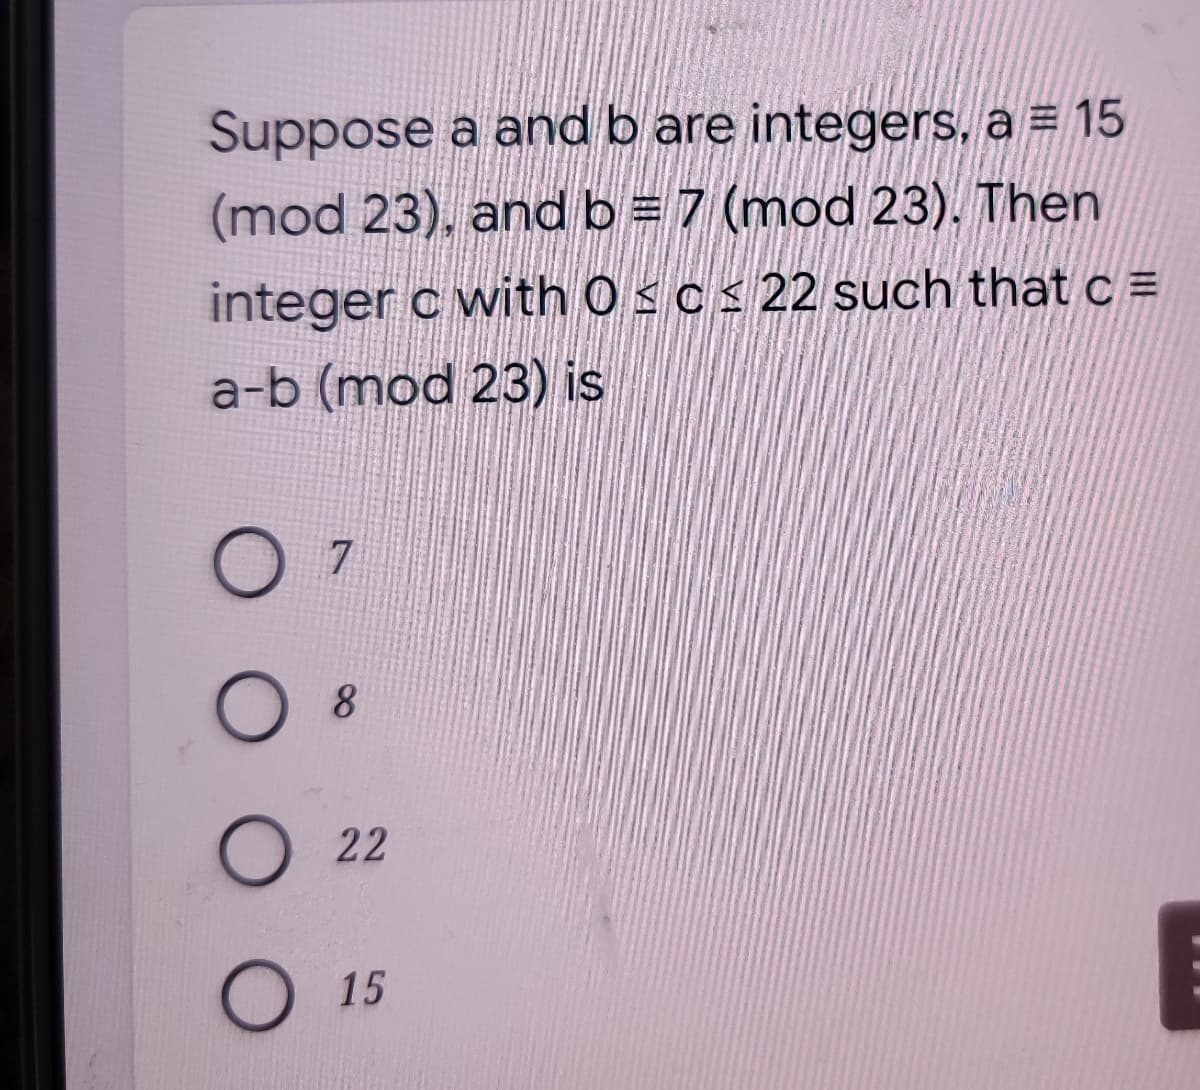 Suppose a and b are integers, a = 15
(mod 23), and b = 7 (mod 23). Then
integer c with 0sc< 22 such that c =
a-b (mod 23) is
7
8
O 22
O15
